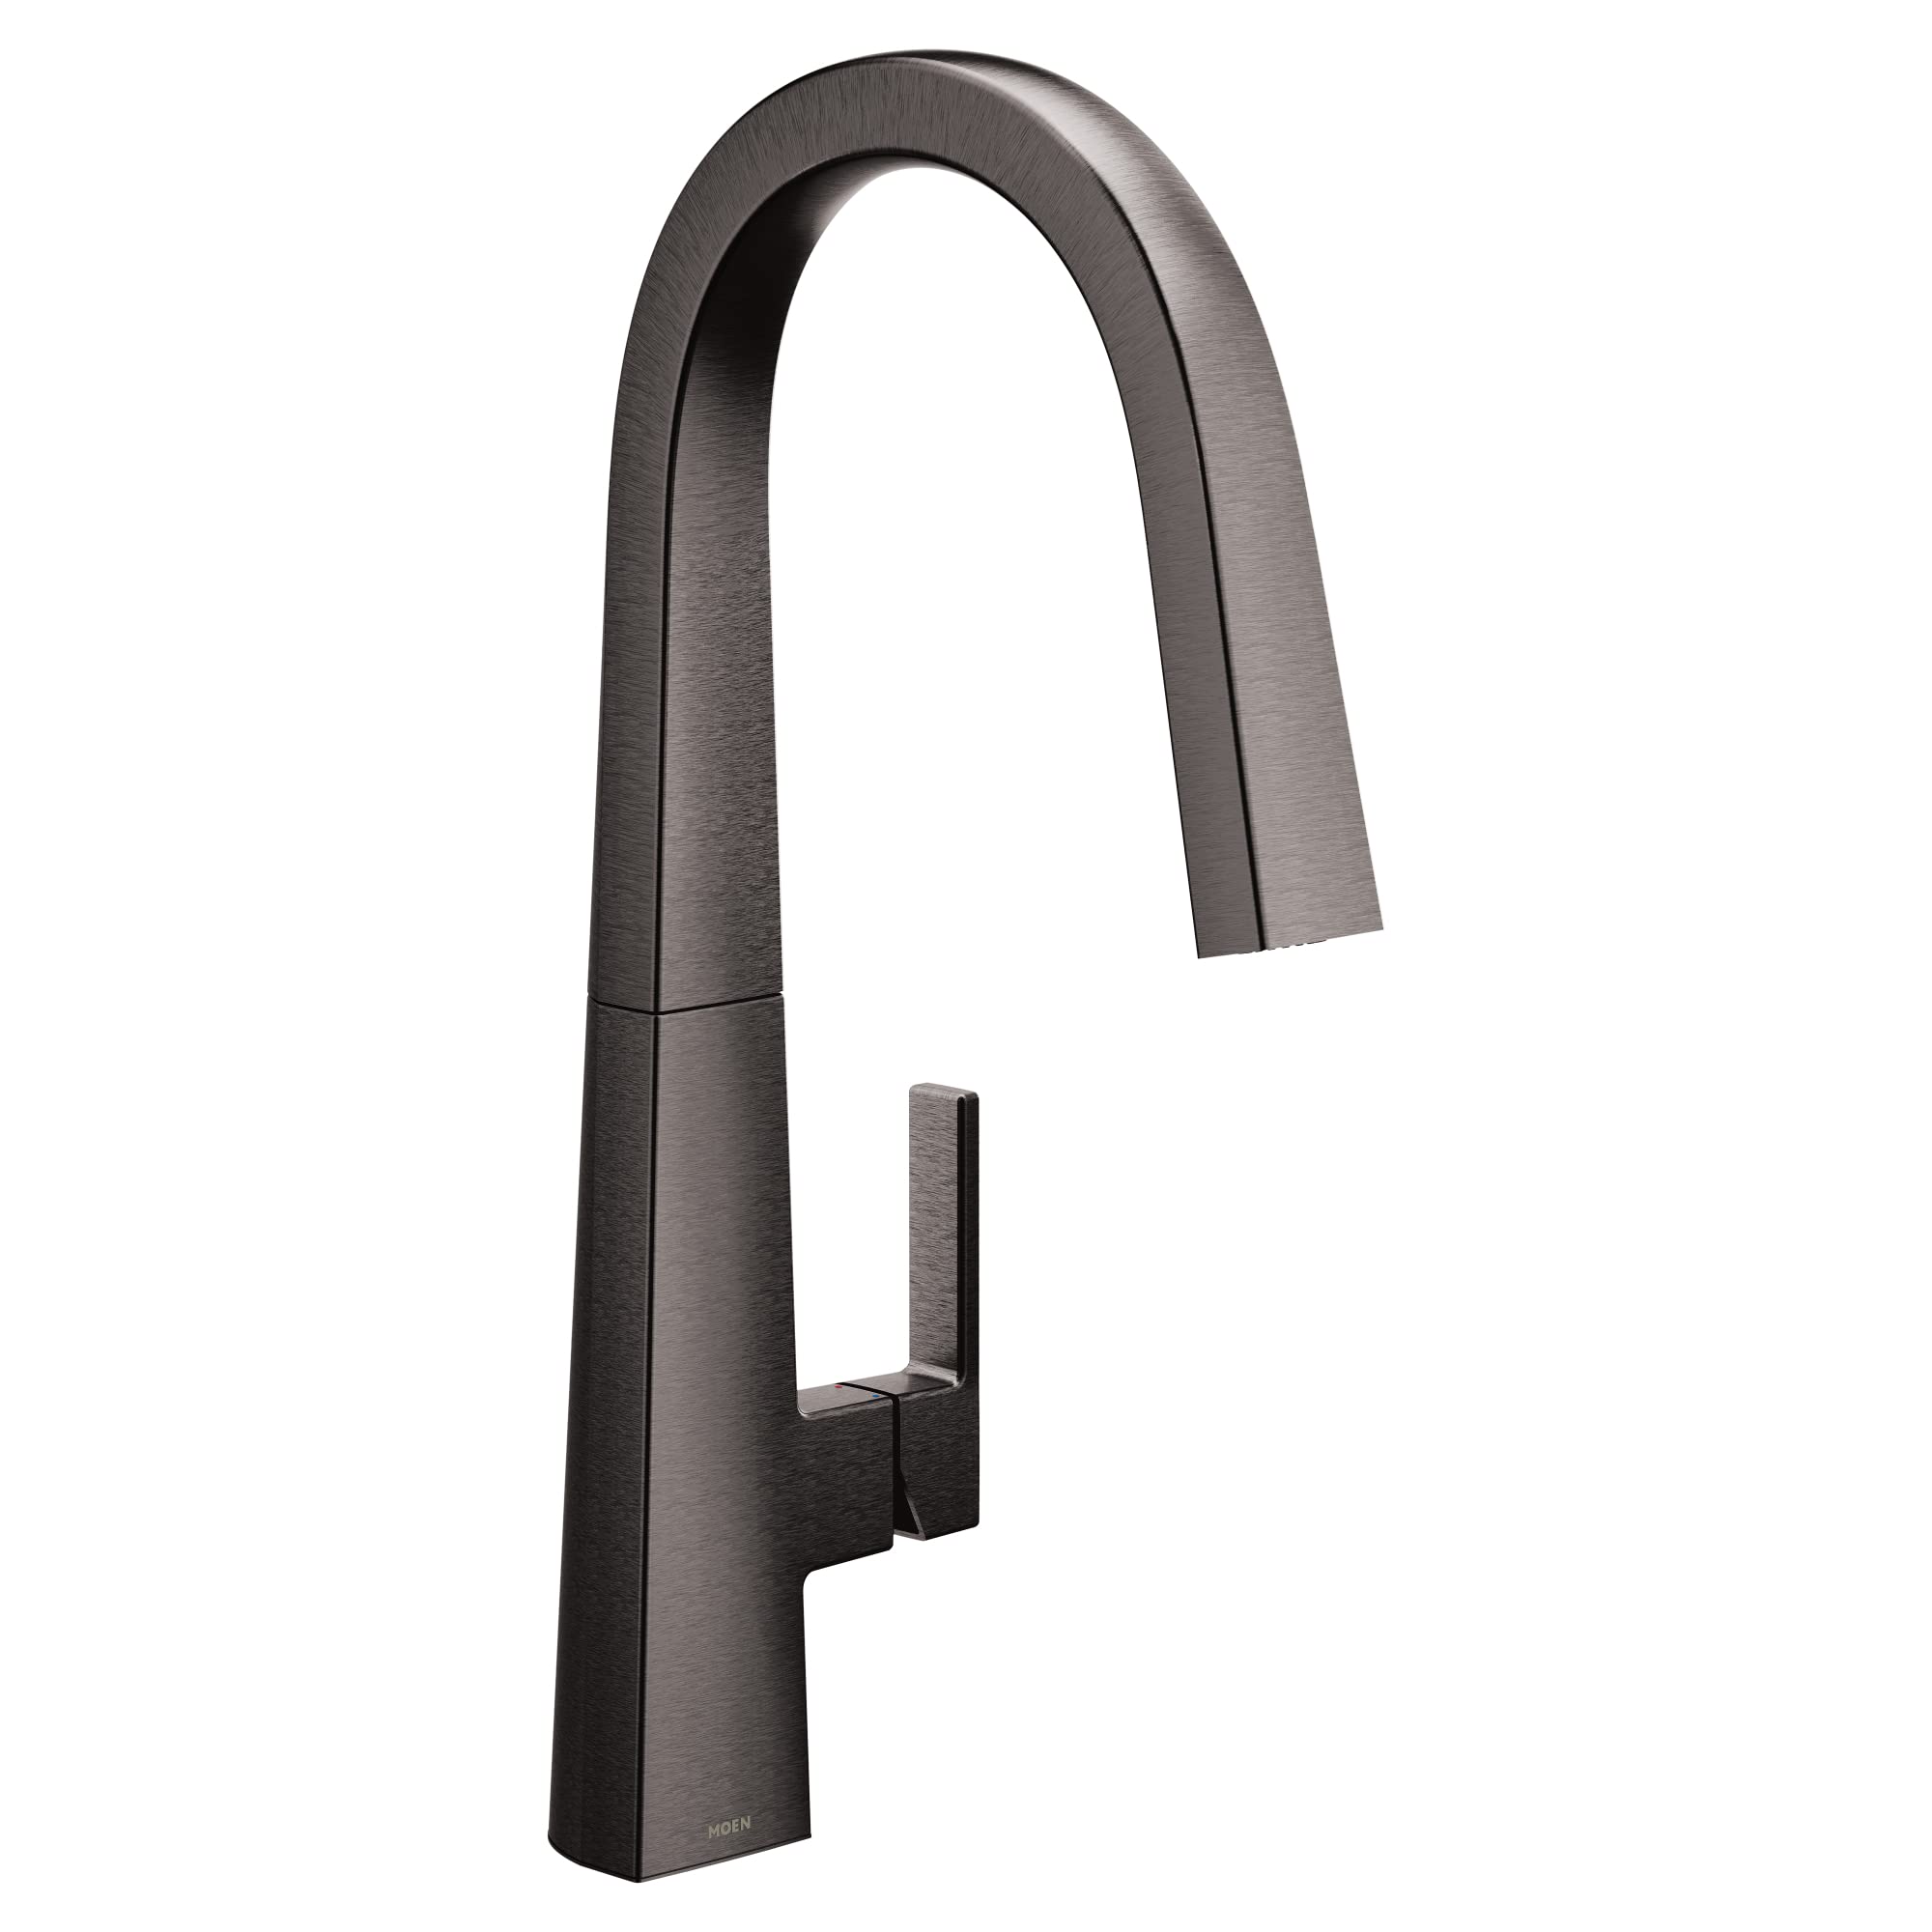 Moen S75005BLS Nio One-Handle Pull-down Kitchen Faucet with Power Clean, Includes Secondary Finish Handle Option, Black Stainless